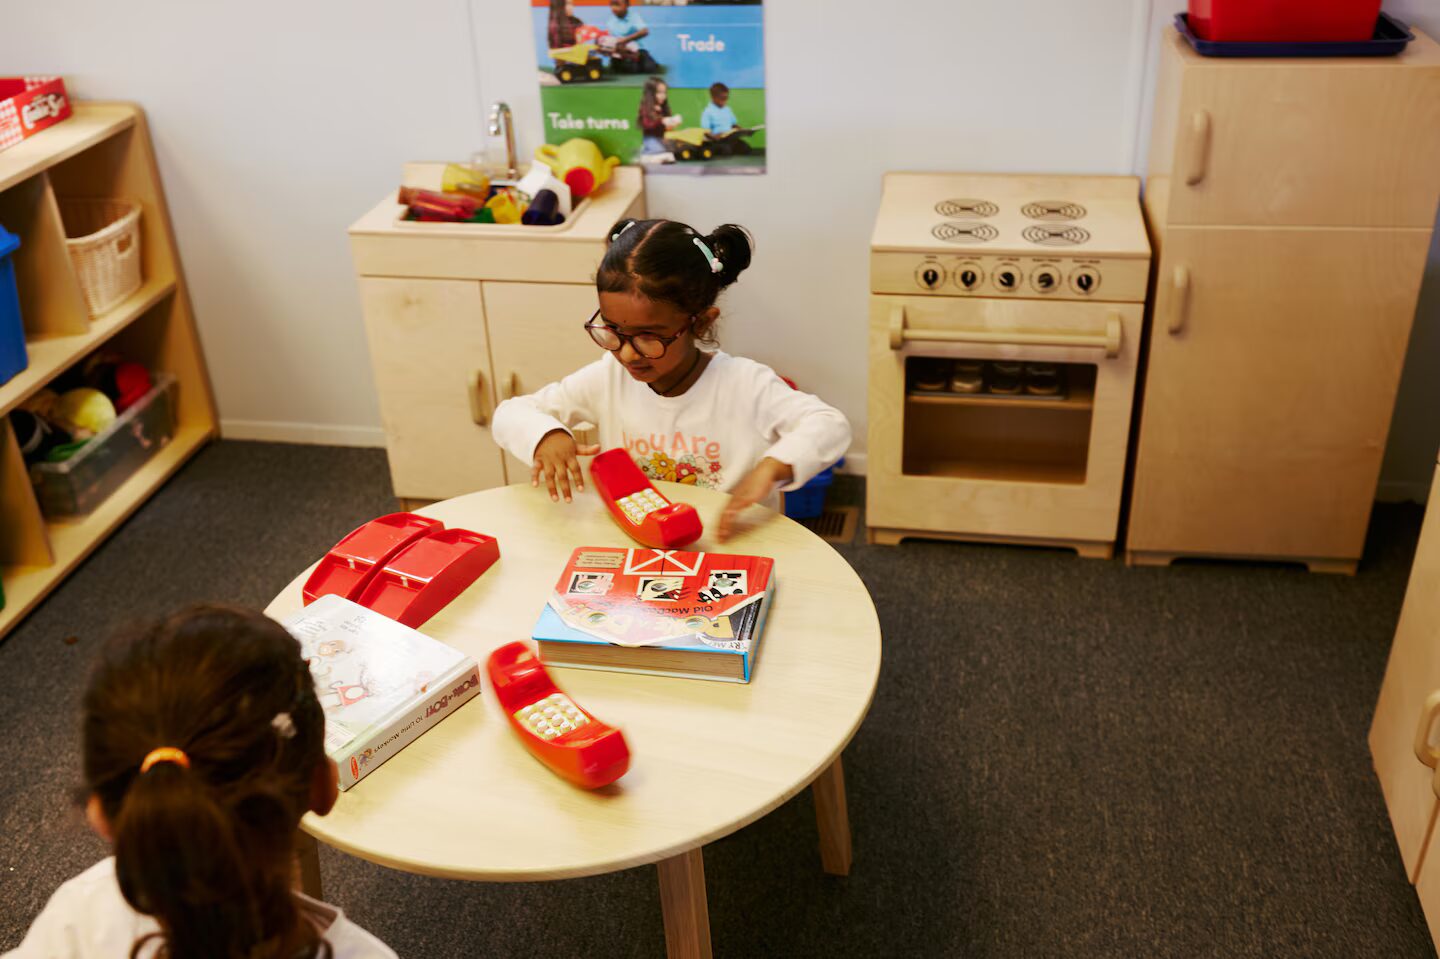 Colorado public preschool: Two preschool girls sit at a low, round table playing with large, red, plastic phones with a play kitchen sink, stove and refrigerator (all in light wood) behind them.